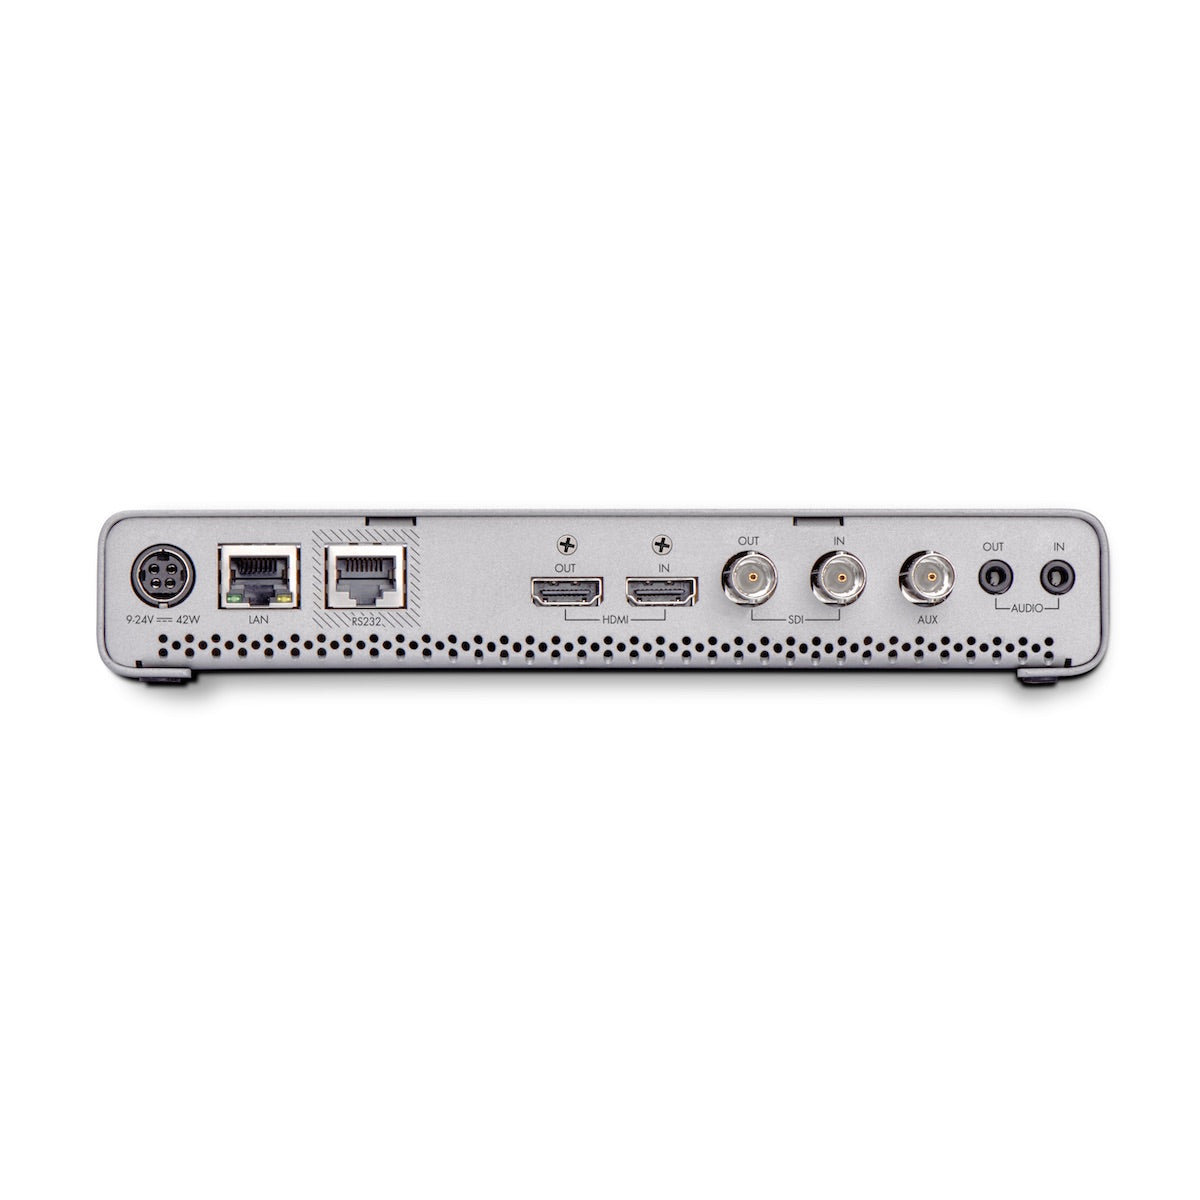 Matrox Monarch HDX - Dual-Channel H.264 Video Streaming Encoder and Recording Appliance, rear